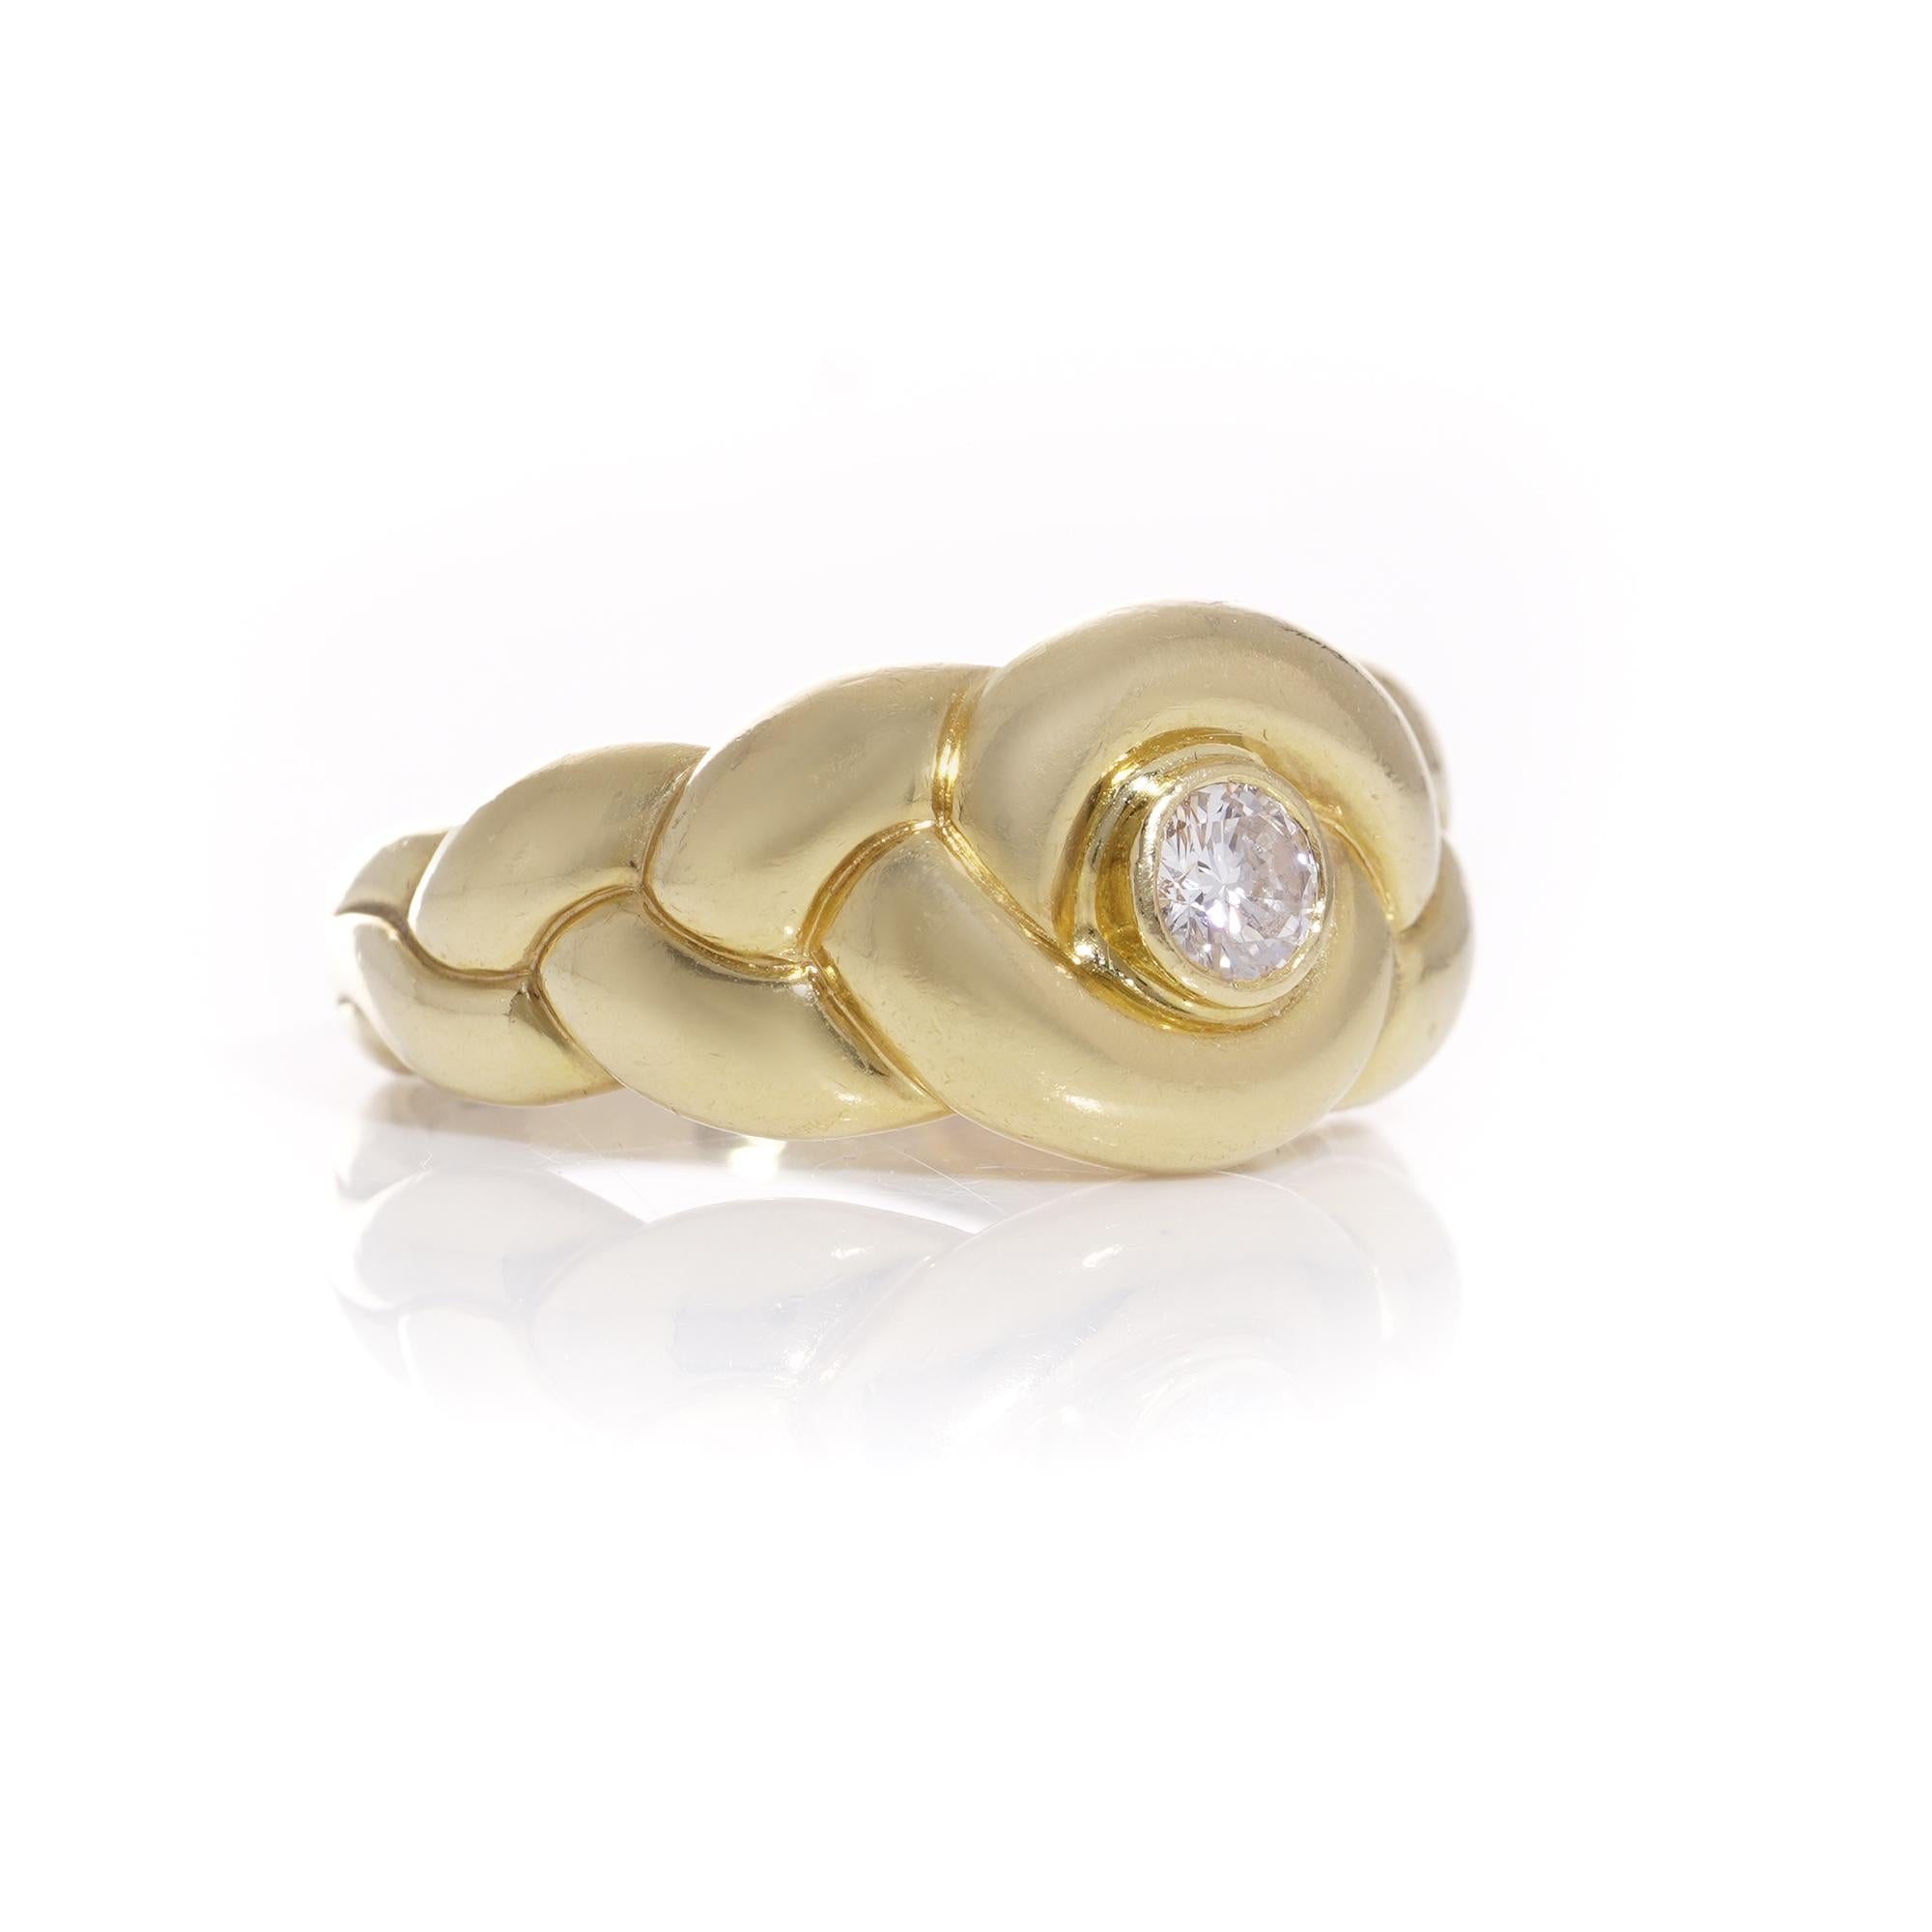 Introducing a timeless symbol of elegance and sophistication: the Van Cleef & Arpels 18kt. yellow gold braid design ring. Crafted with meticulous attention to detail, this exquisite piece features a captivating braid design, expertly woven in